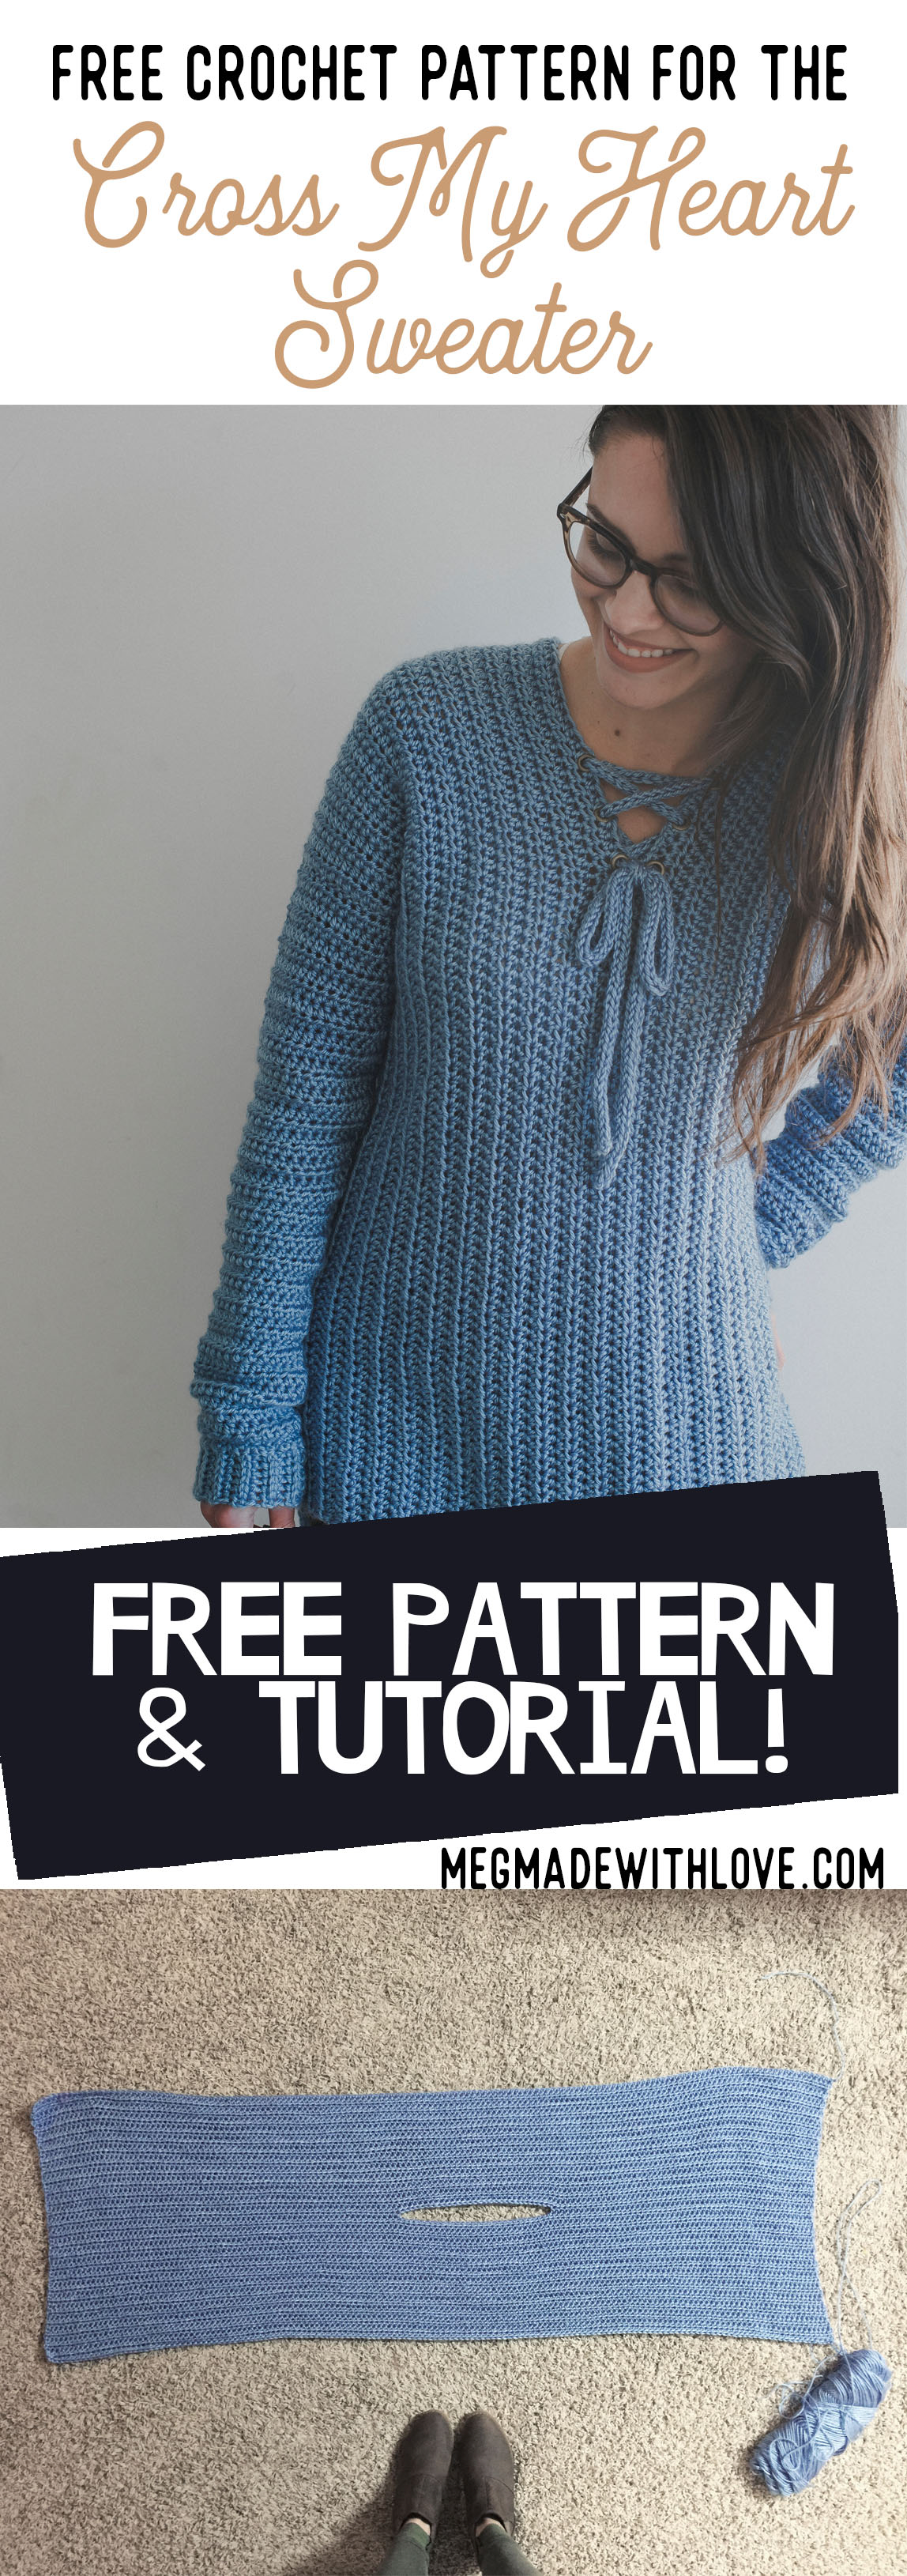 New Free Crochet Pattern for the Varsity Sweater! — Megmade with Love